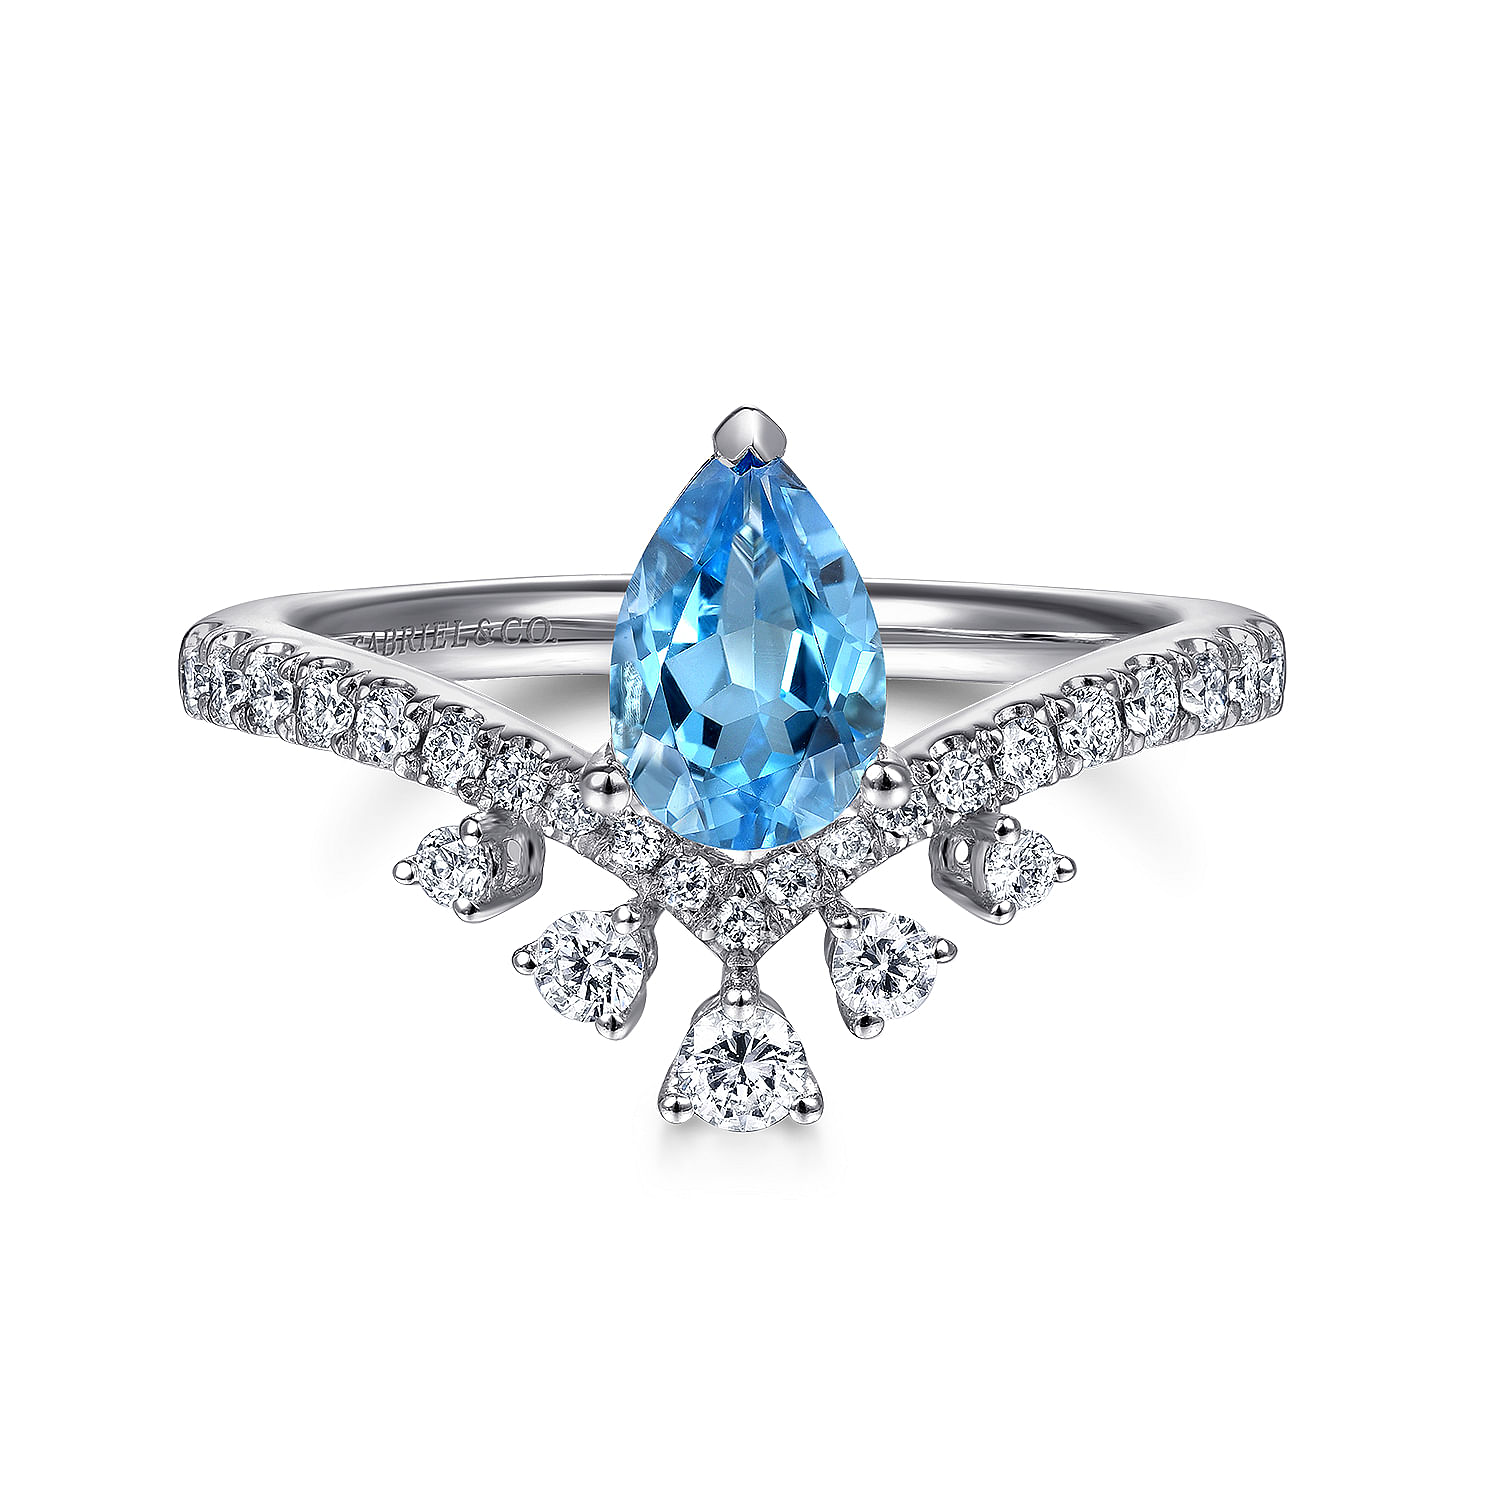 14K White Gold Pear Shaped Swiss Blue Topaz and Diamond Ring